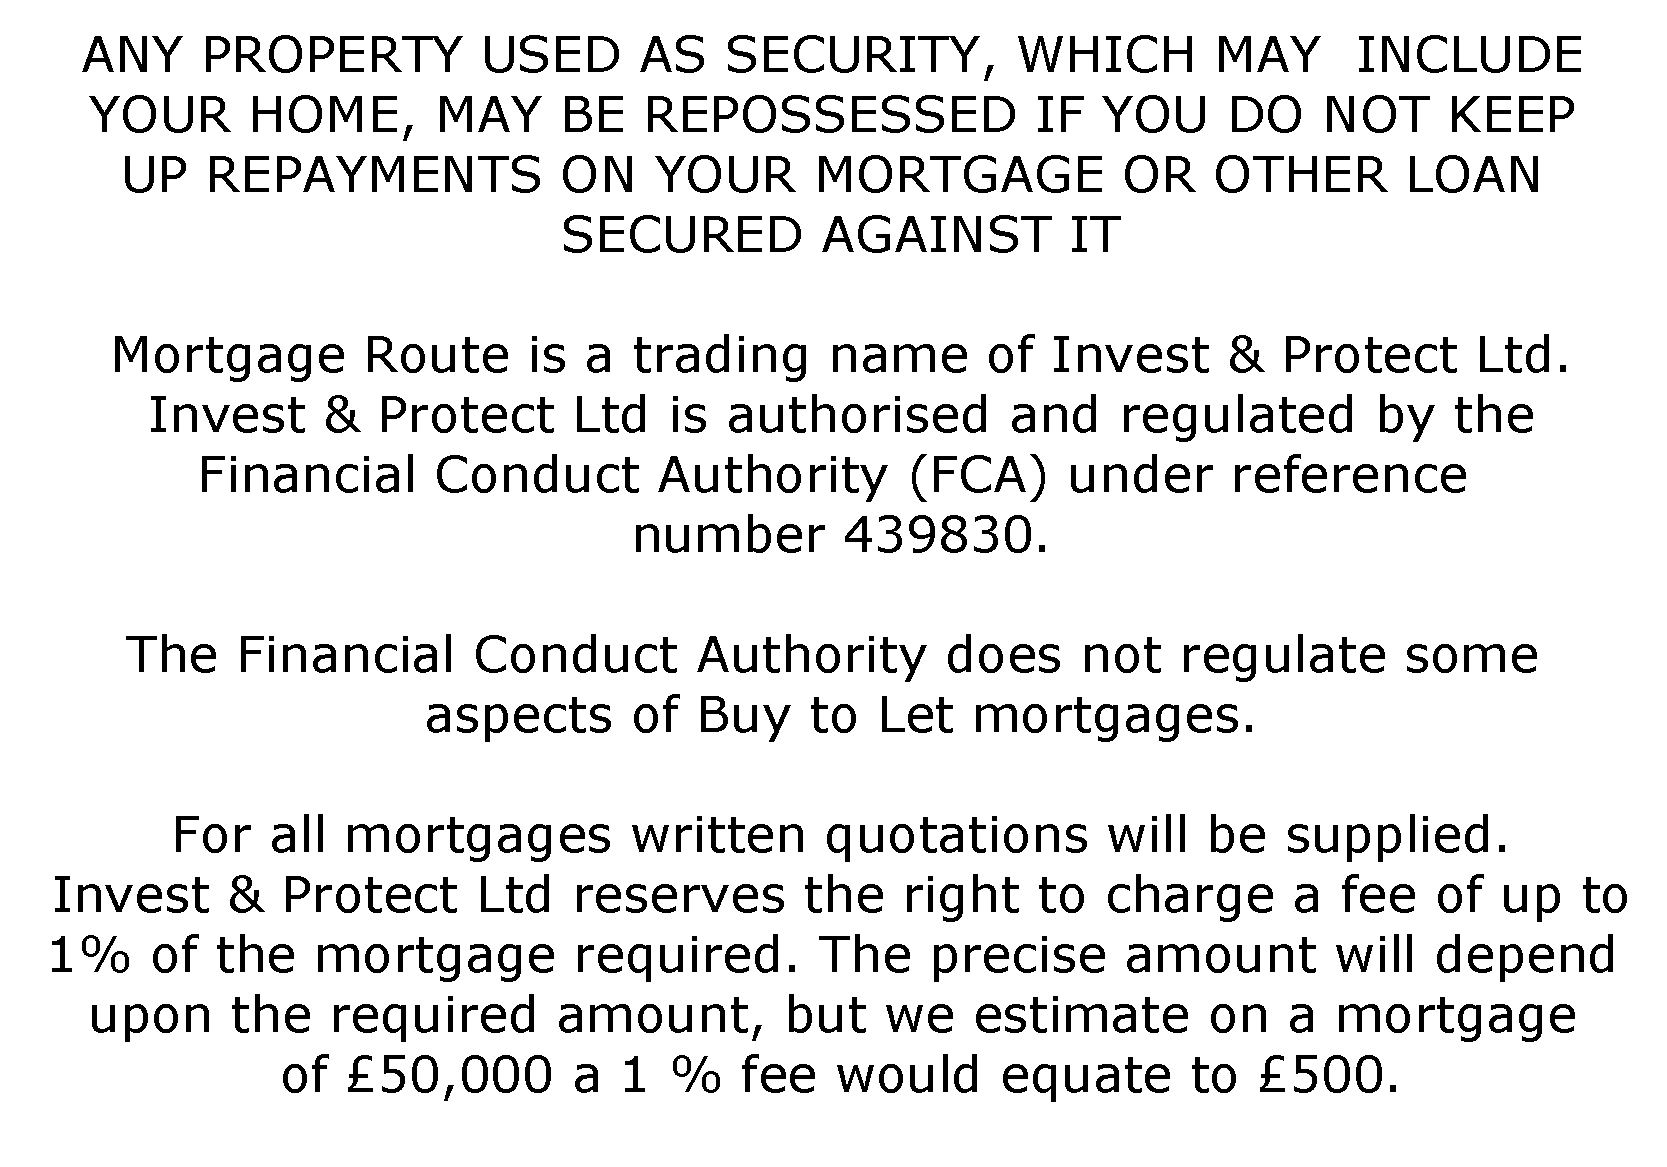 FSA declaration and important text about mortgages